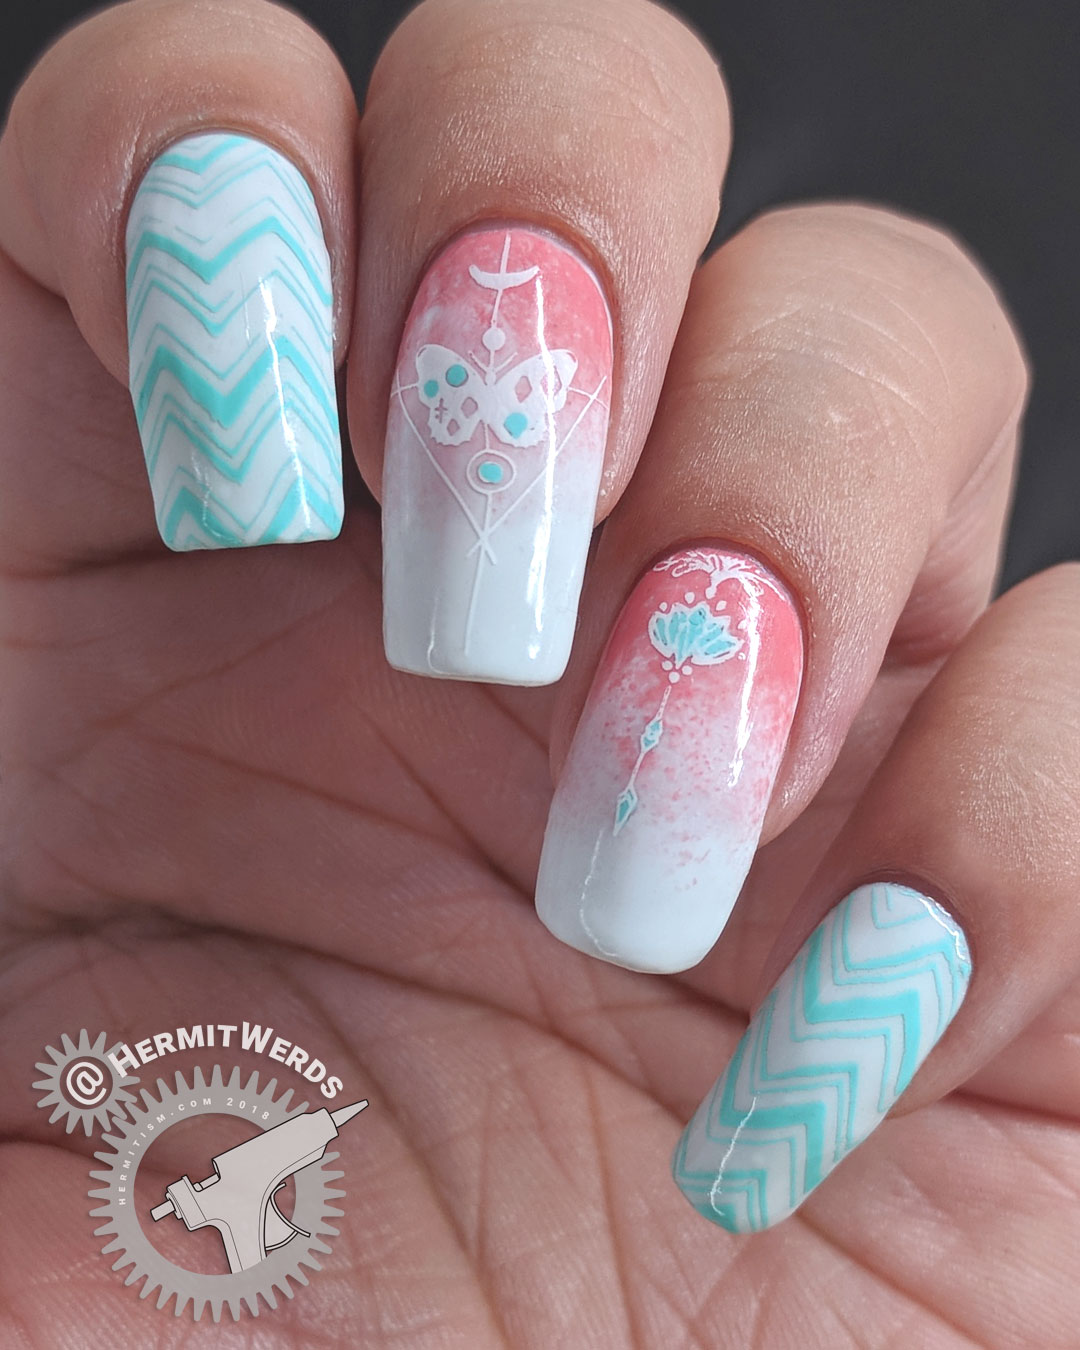 Coral, Mint, and White - Hermit Werds - cool chevron and geometric butterfly/flowering plant stamped on white and coral gradient